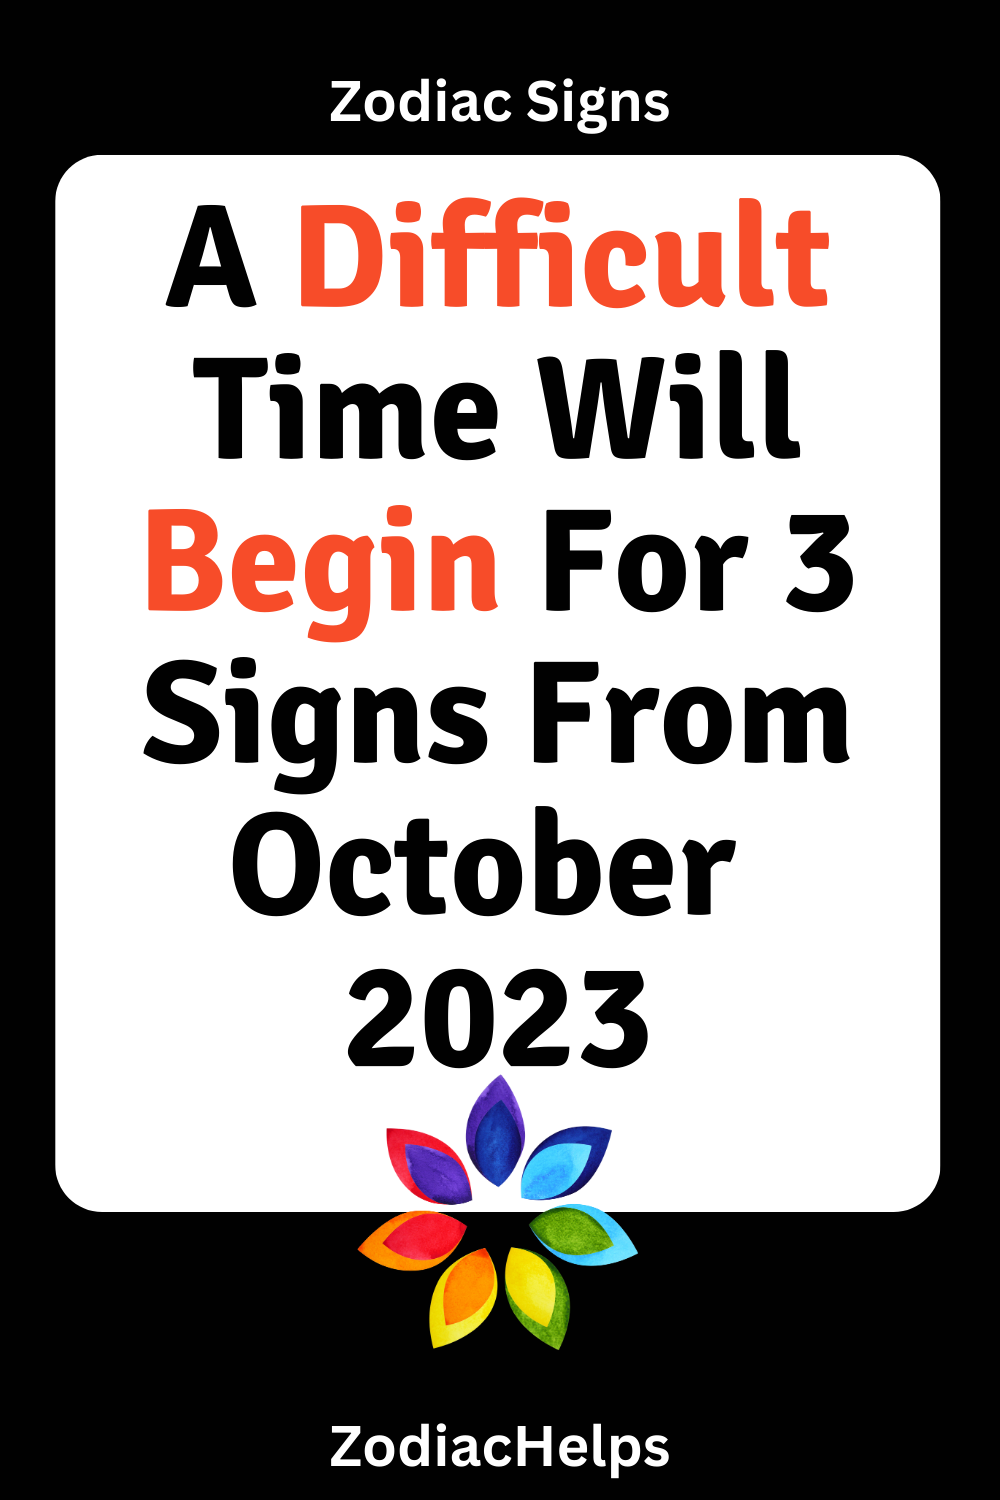 A Difficult Time Will Begin For 3 Signs From October 2023